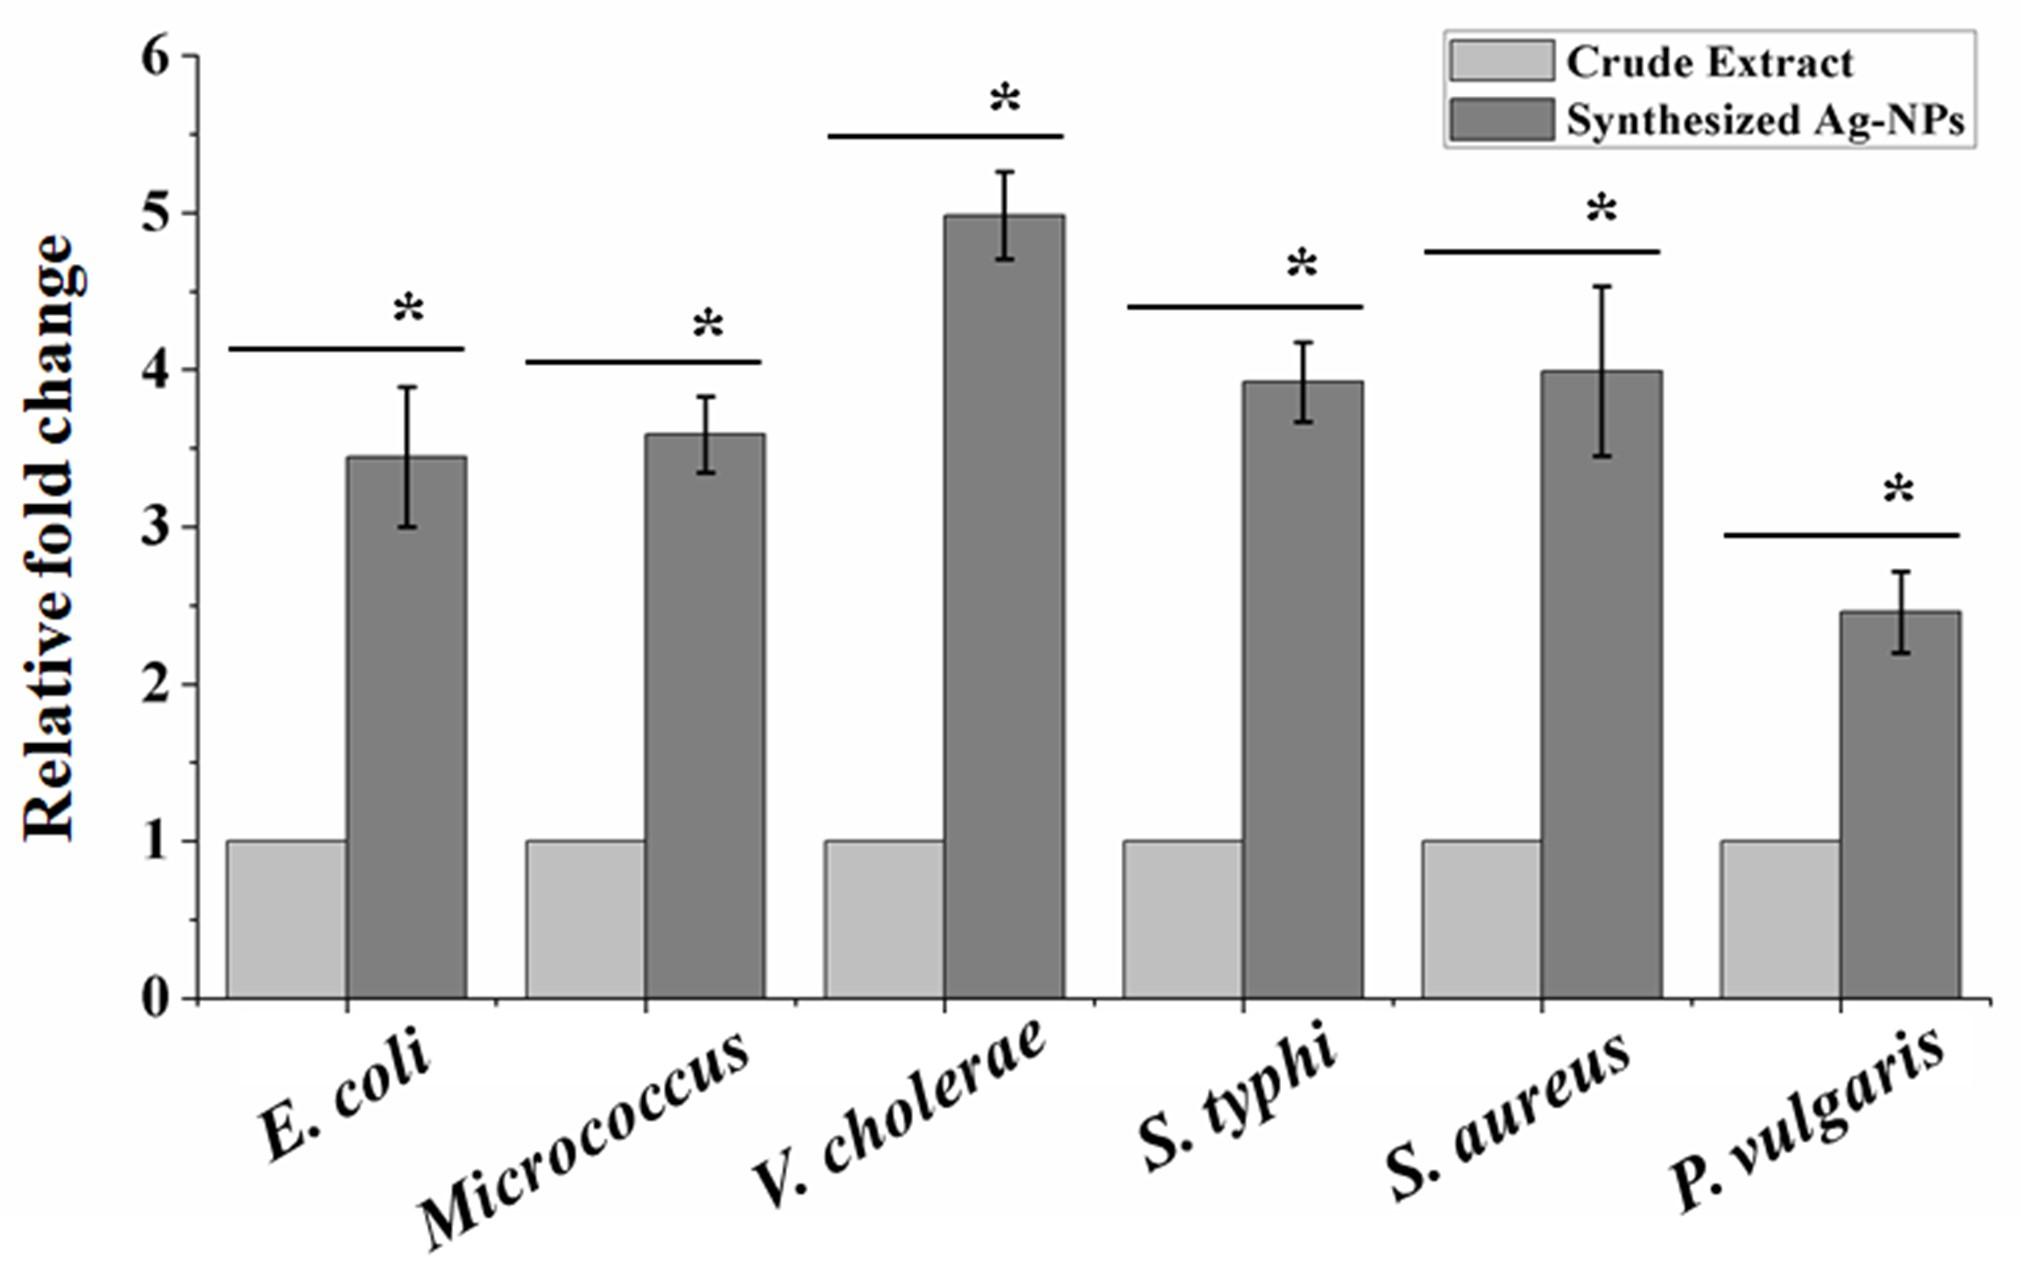 Antibacterial potential of synthesized silver nanoparticles from leaf extract of Moringa oleifera